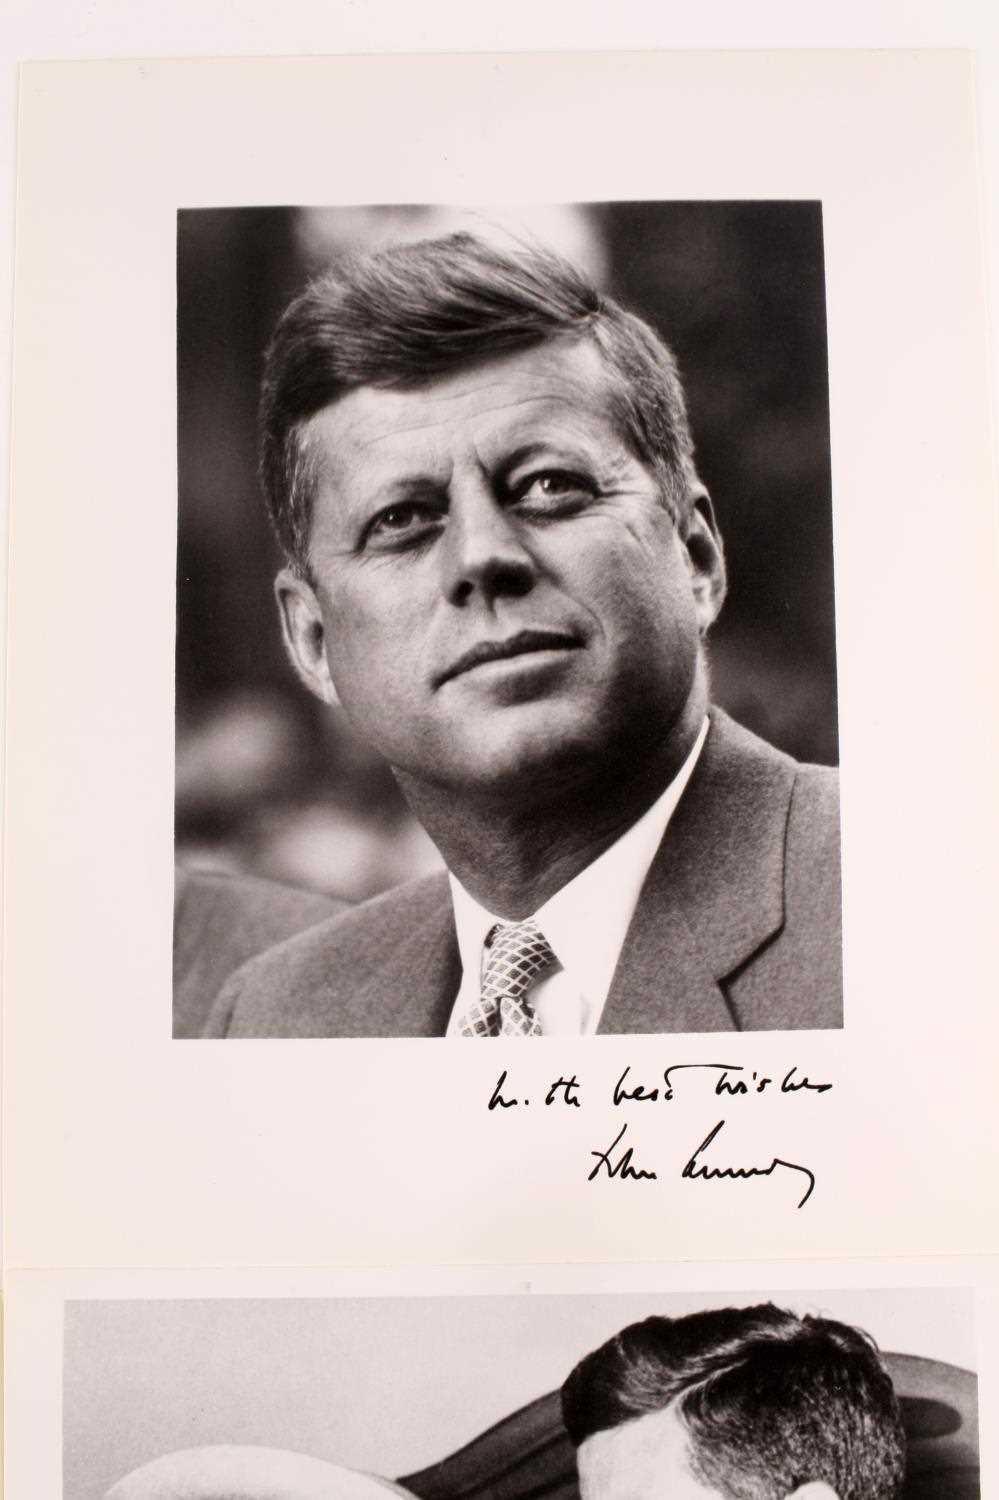 GROUP OF 4 ASSORTED PHOTOGRAPHS OF JOHN F. KENNEDY